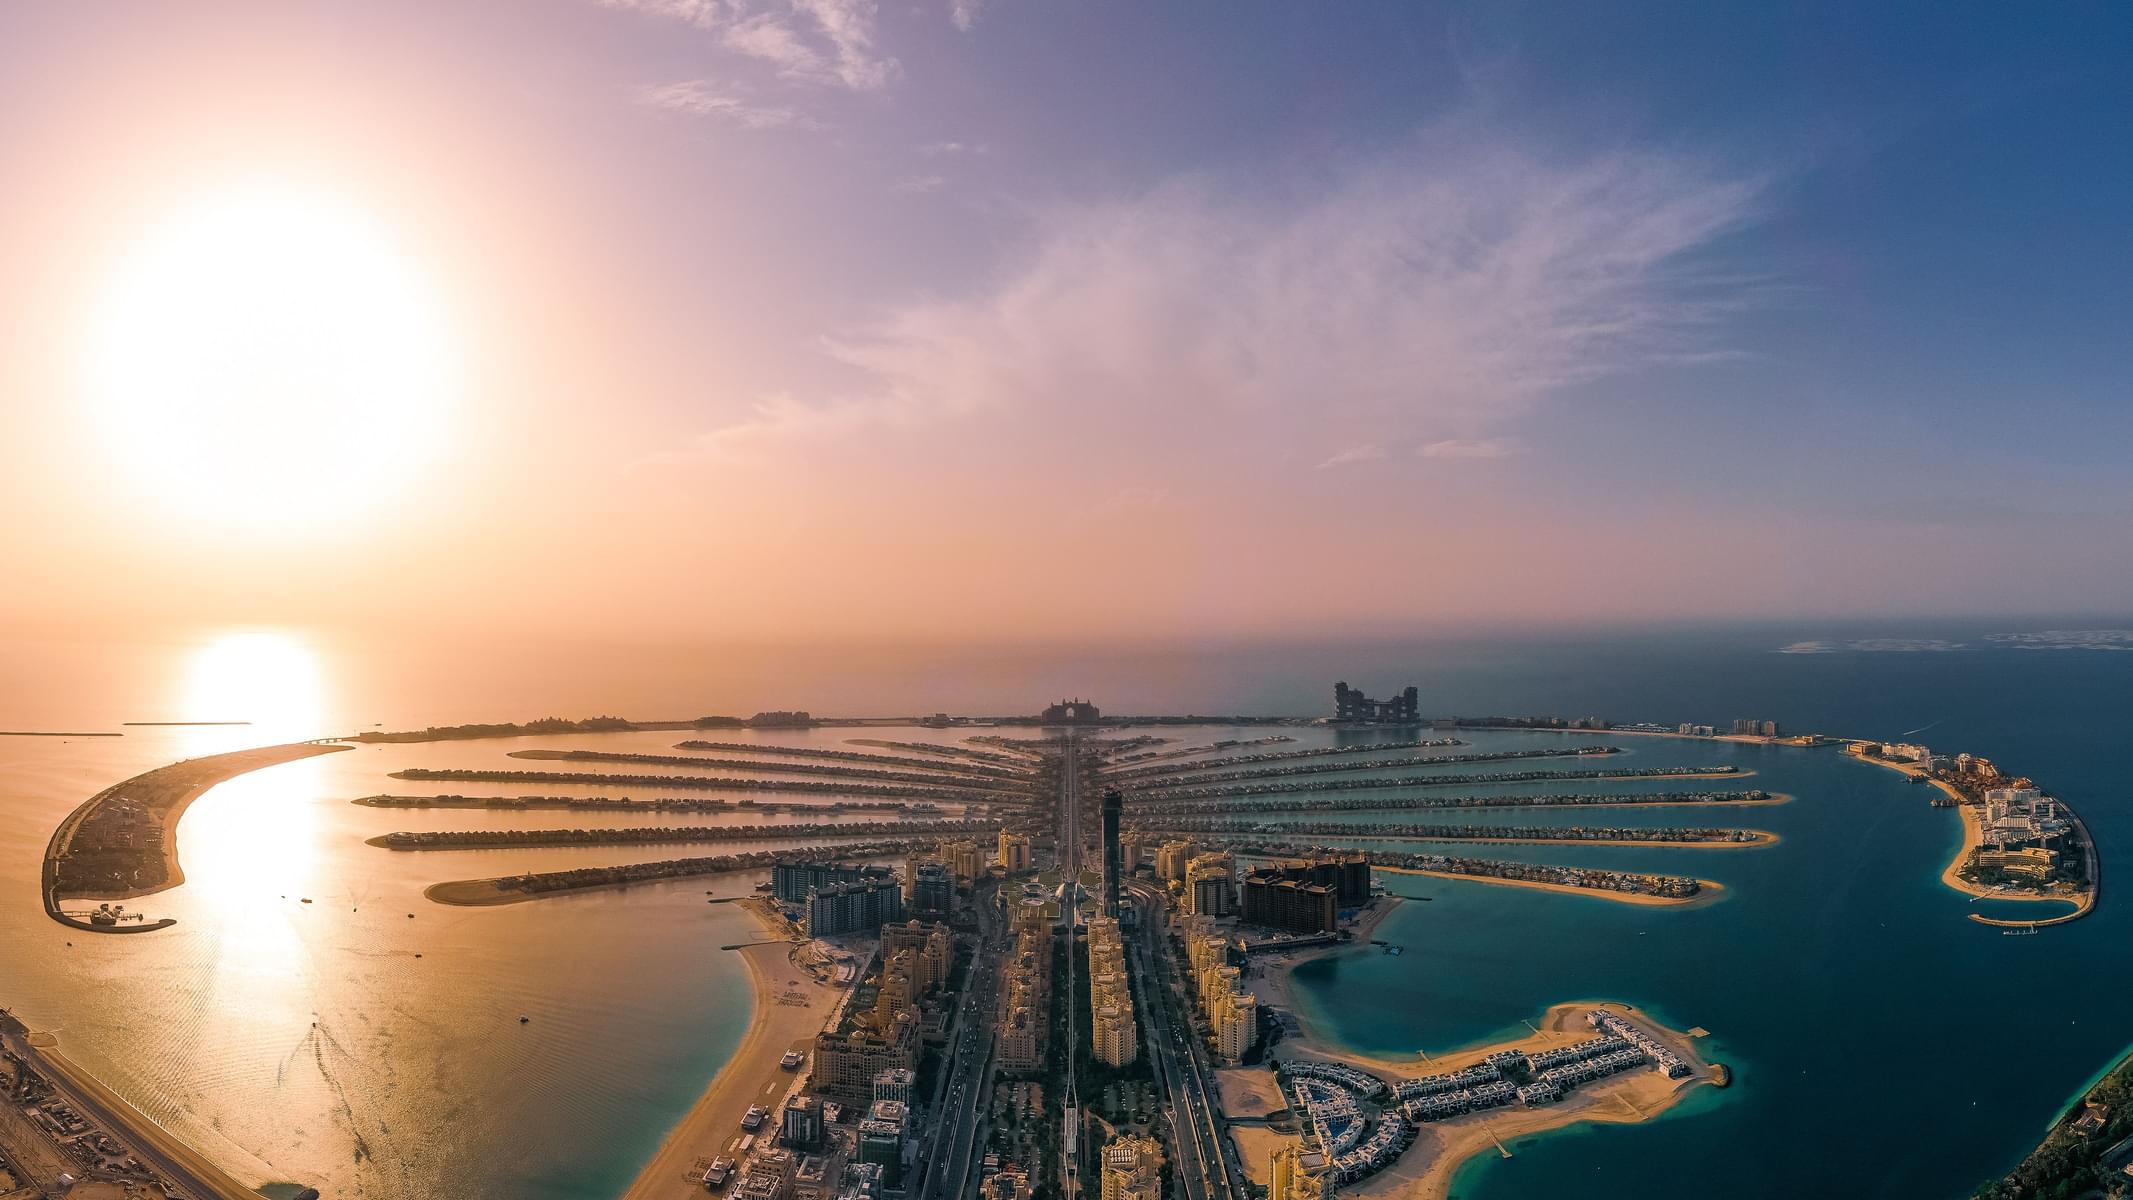 Admire the beauty of Dubai from The View at the Palm